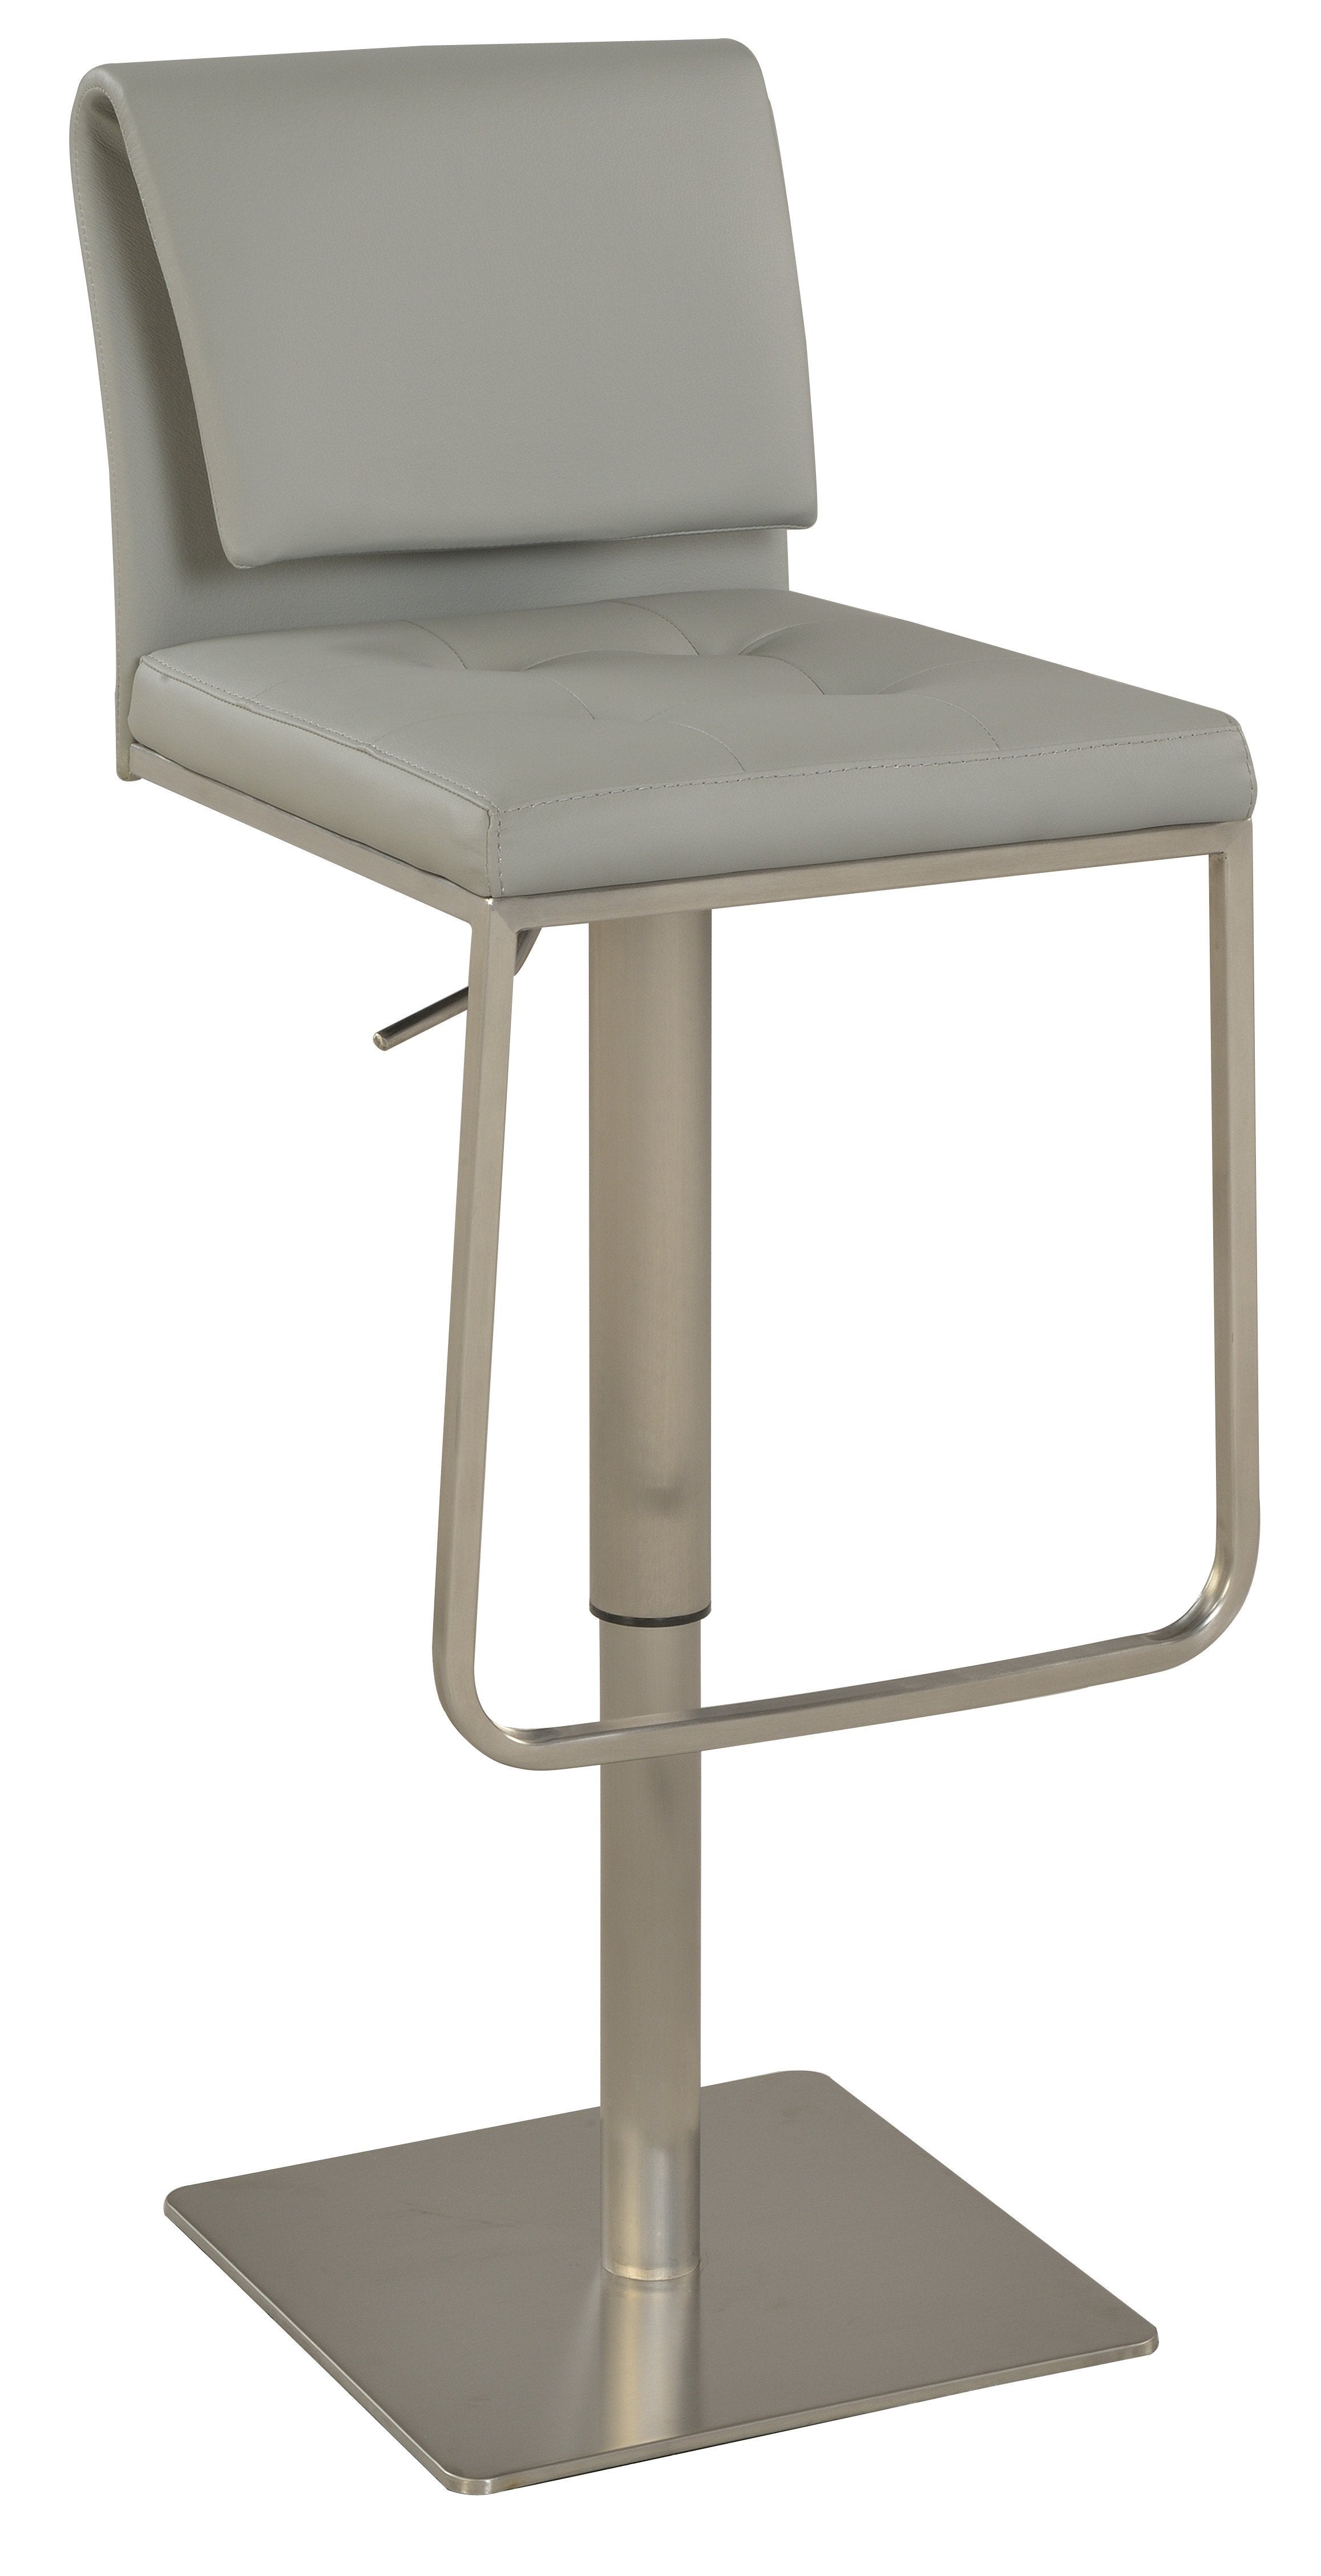 Chintaly 0893-as-gry Contemporary Pneumatic Stool